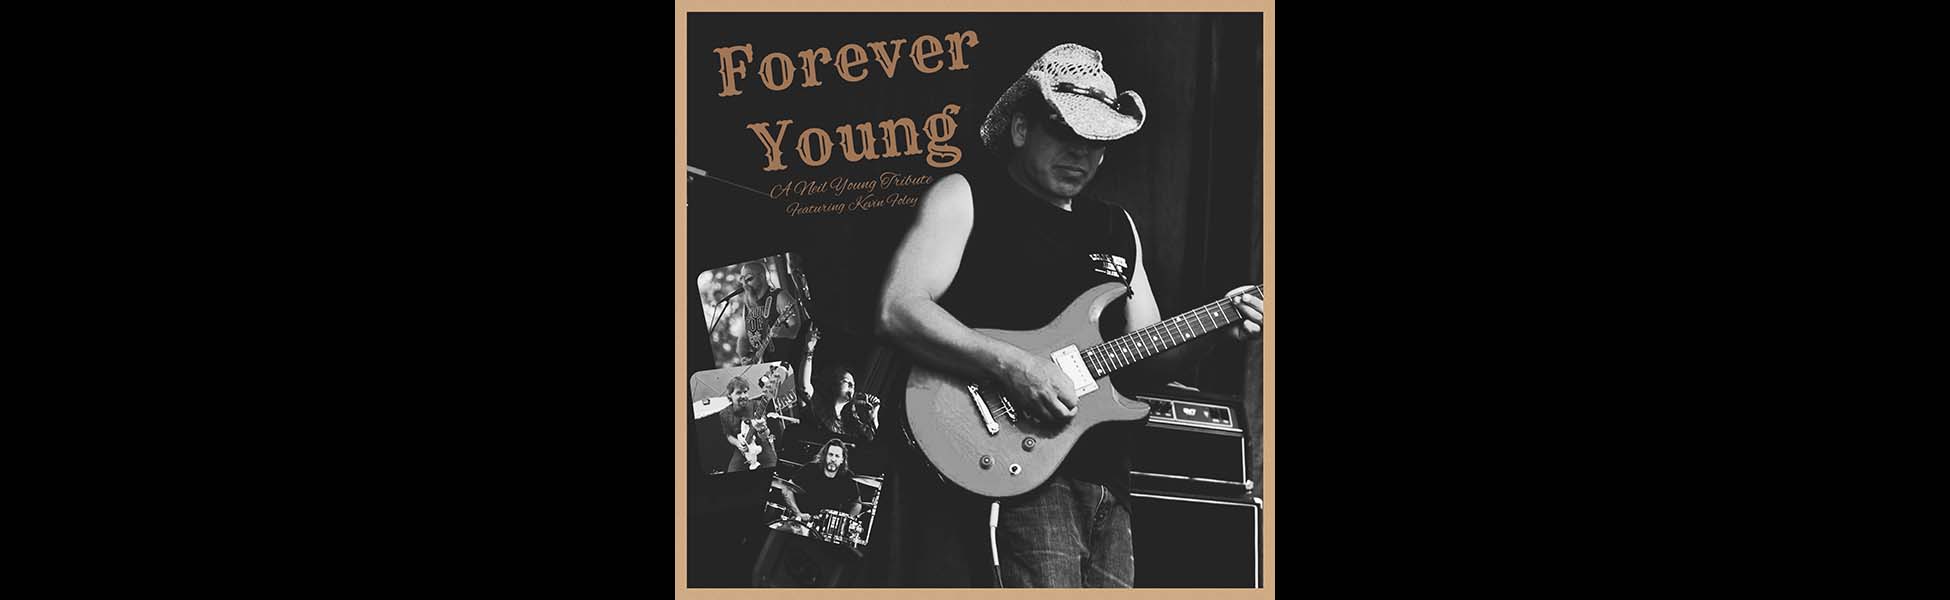 Forever Young - Neil Young tribute band